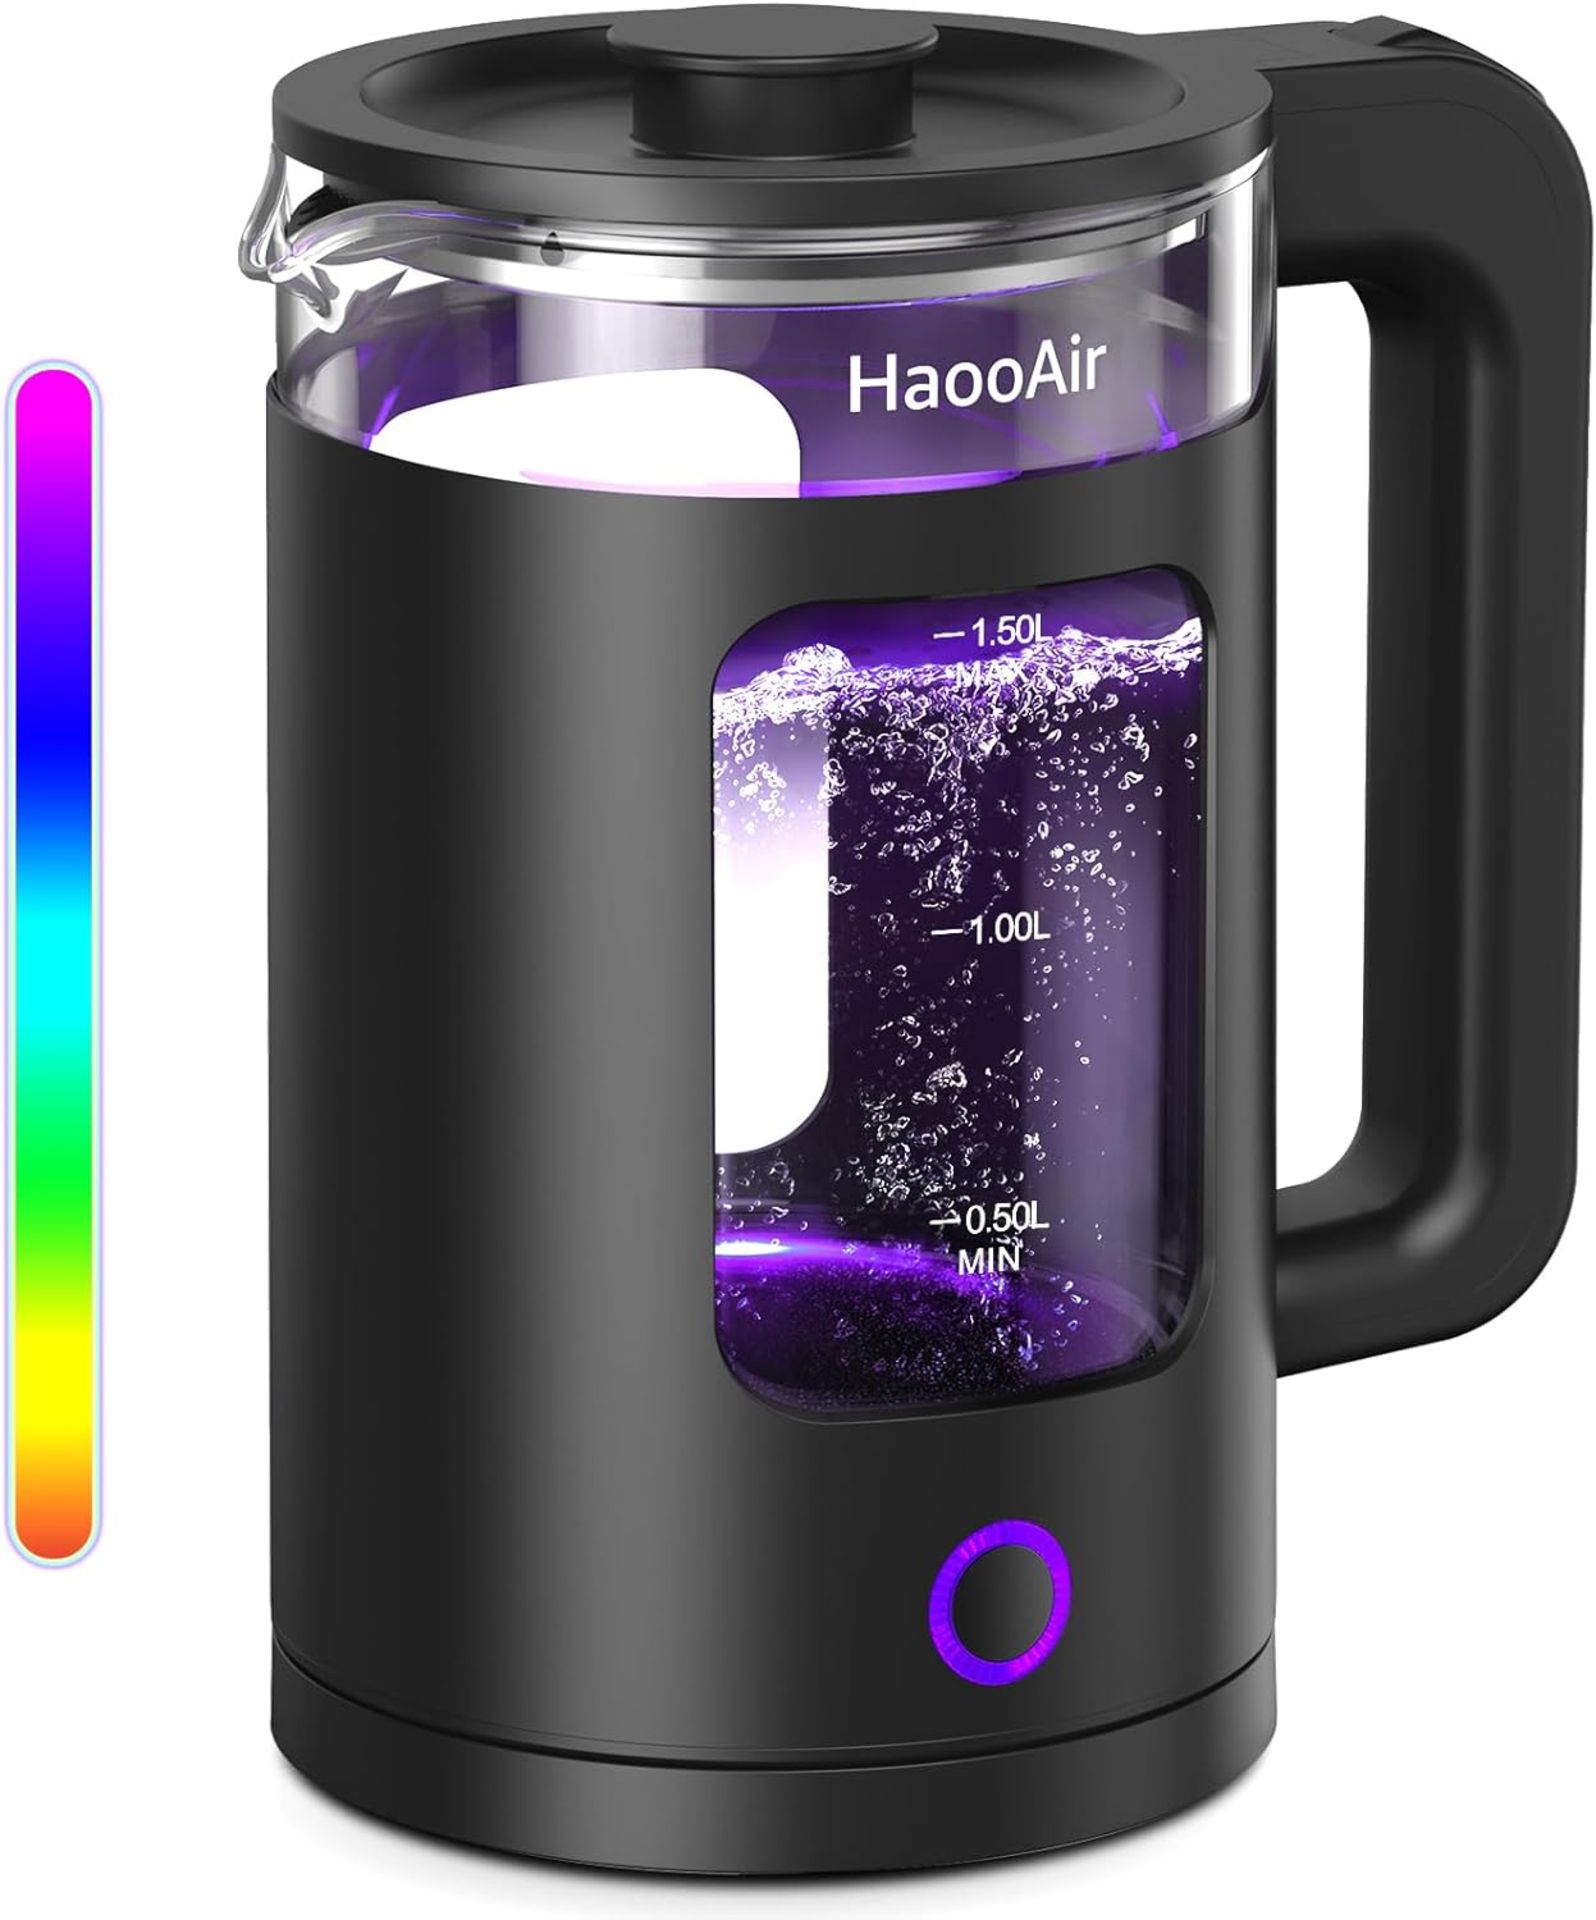 RRP £34.99 Haooair Kettle, 1.5 Liter Electric Kettle with 7 Colored Lights, Easy to Clean Glass